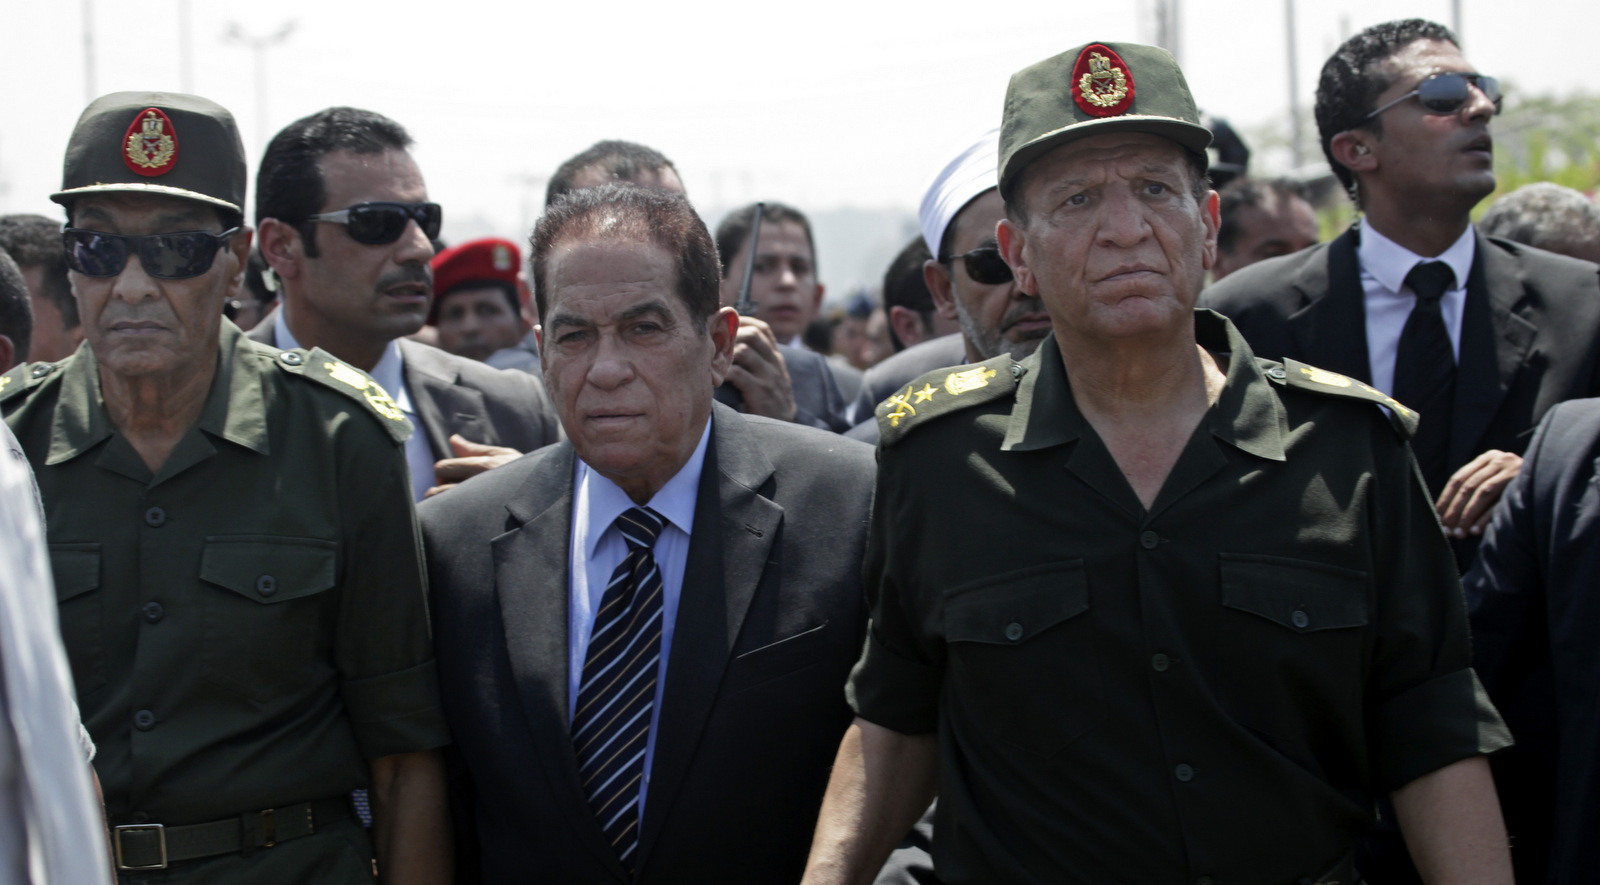 In this Aug. 7, 2012 file photo, Defense Minister Hussein Tantawi, left, former Prime Minister Kamal Ganzouri, center and Armed Forces Chief of Staff Sami Anan, attend the funeral of 16 soldiers killed in an attack over the weekend by suspected militants in Sinai in Cairo, Egypt . (AP/Thomas Hartwell)